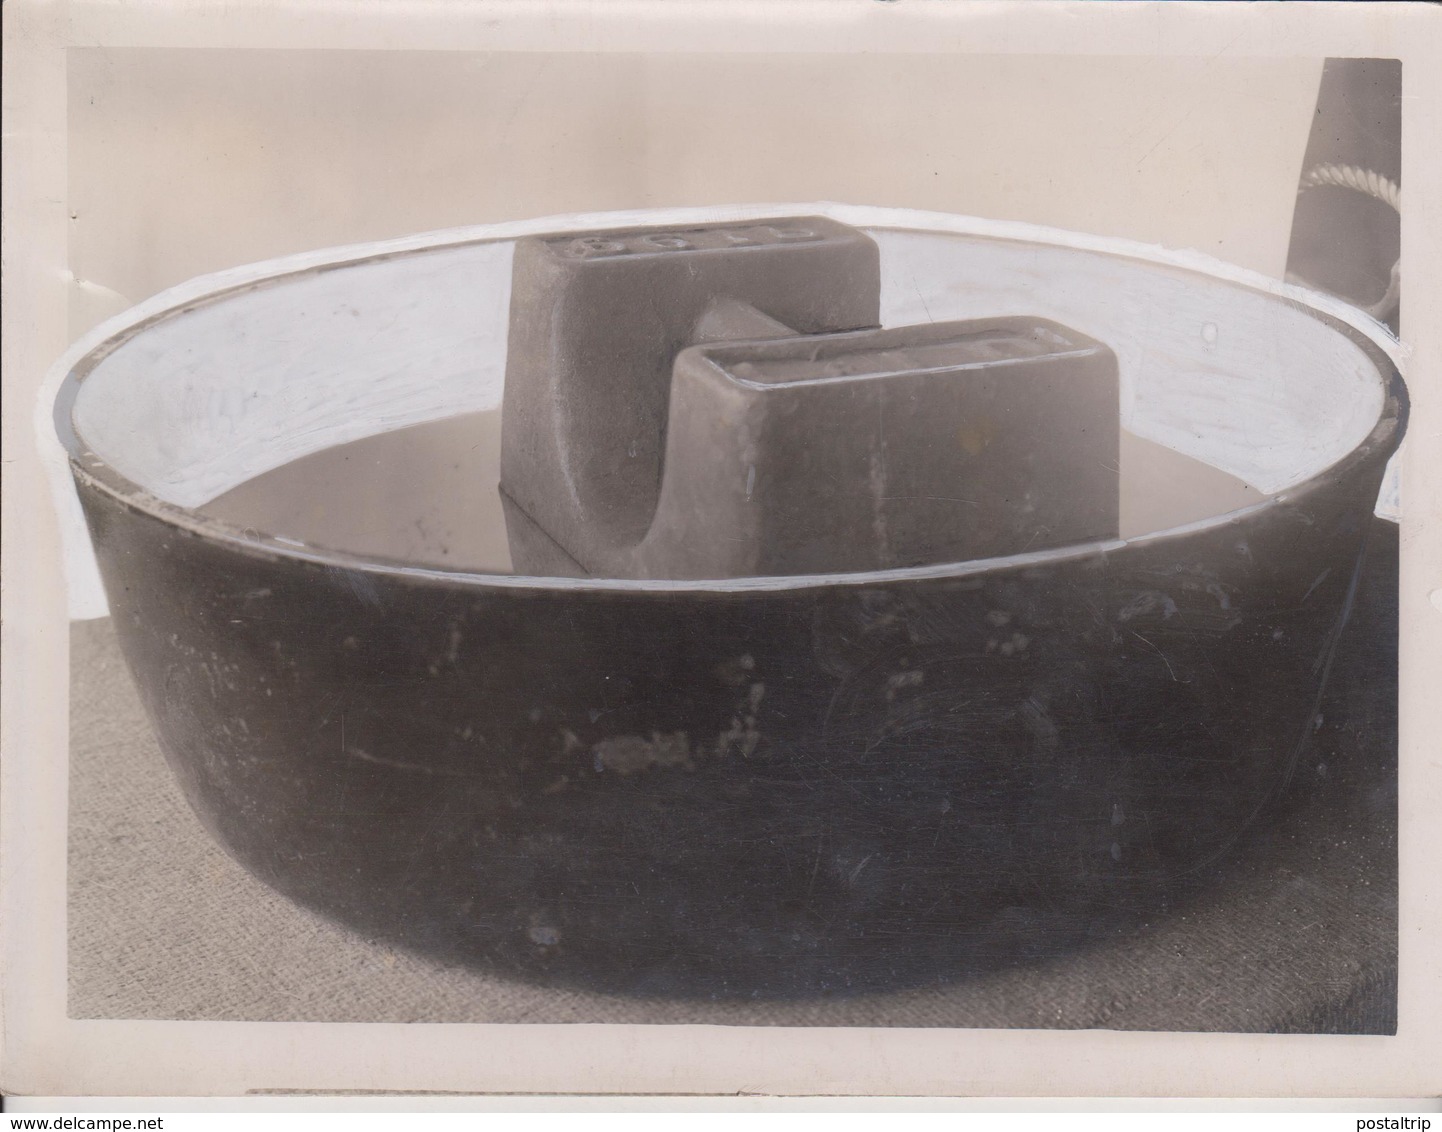 QUICKSILVER HALF HUNDREDWEIGHT OF METAL FLOATING IN A BOWL OF QUICKSILVER   21*16CM Fonds Victor FORBIN 1864-1947 - Profesiones